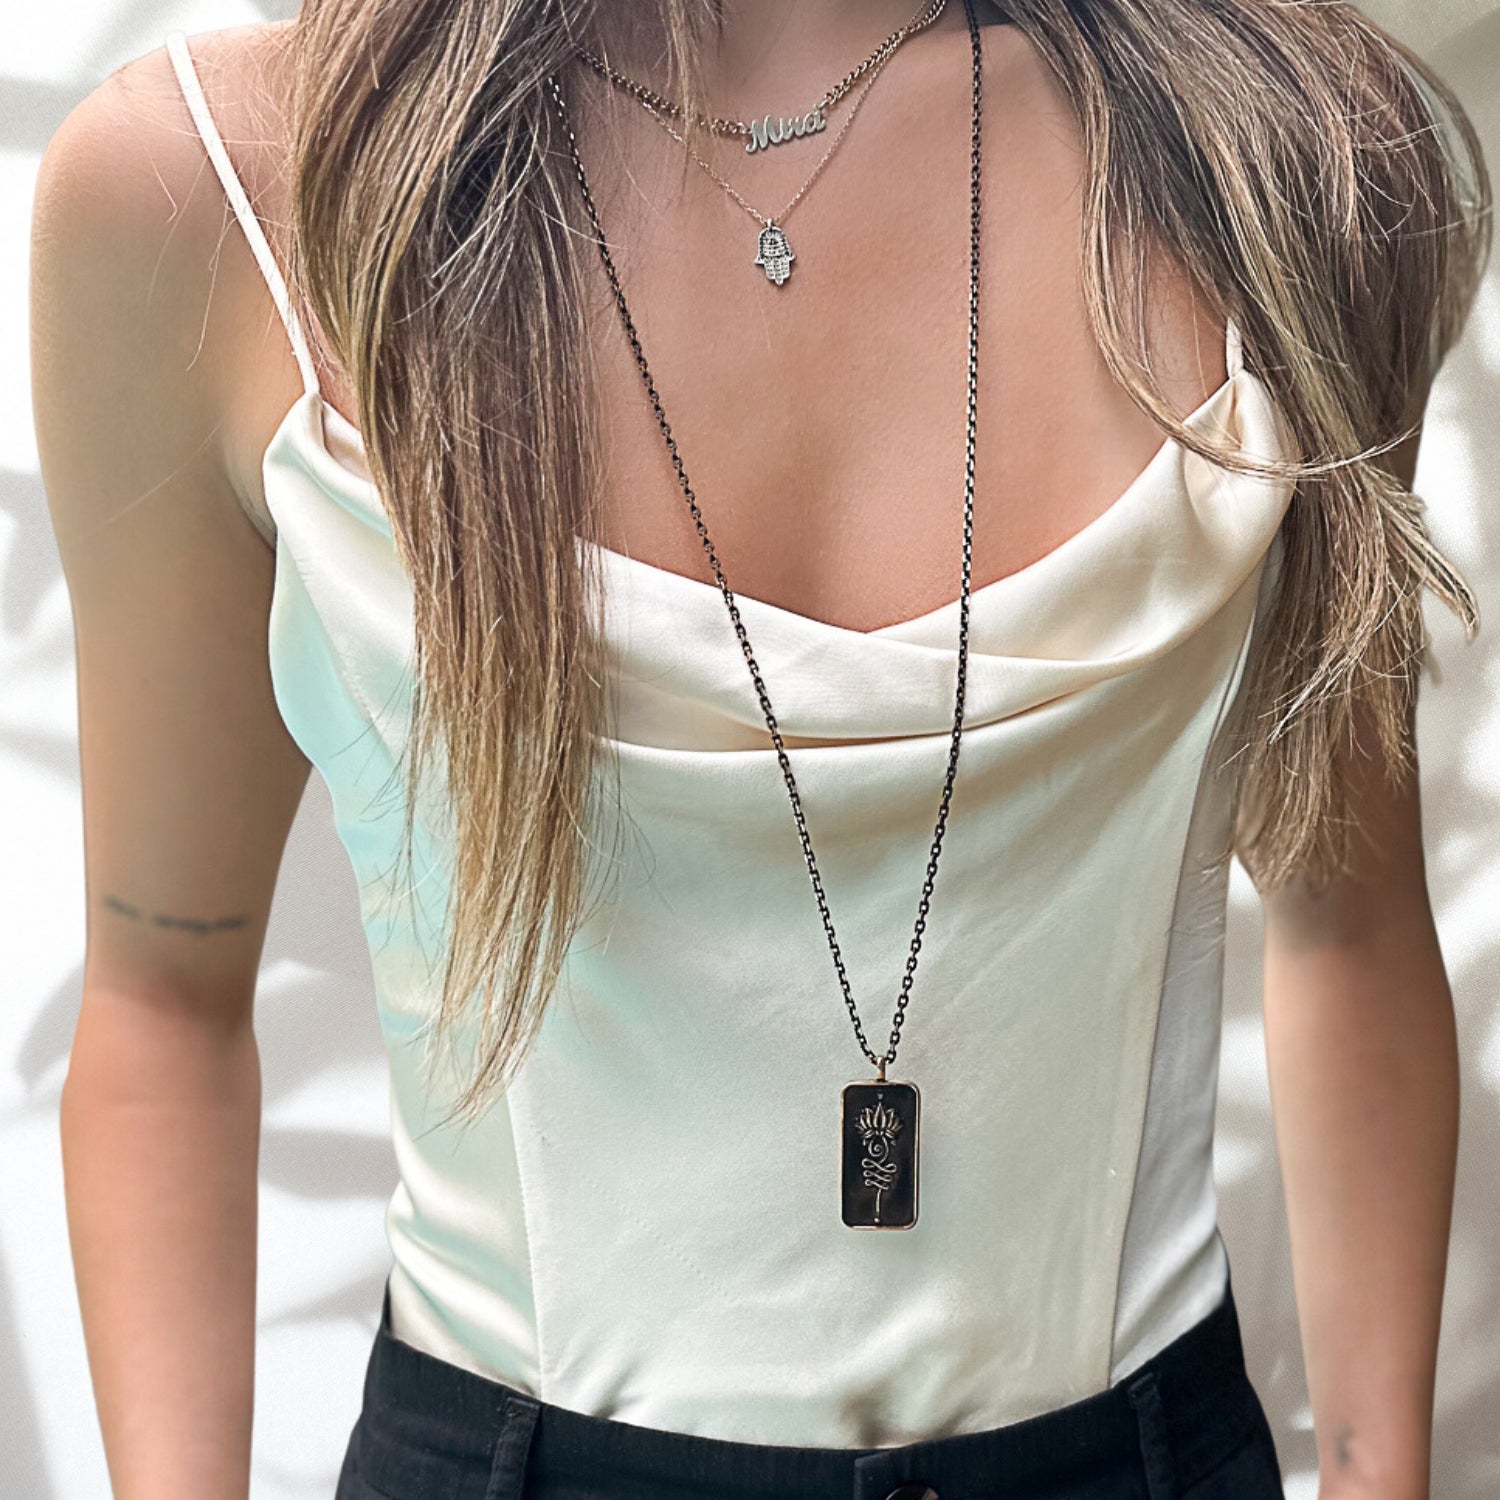 See how the Love Yourself Unalome Necklace beautifully complements our model's style, radiating self-love and confidence.